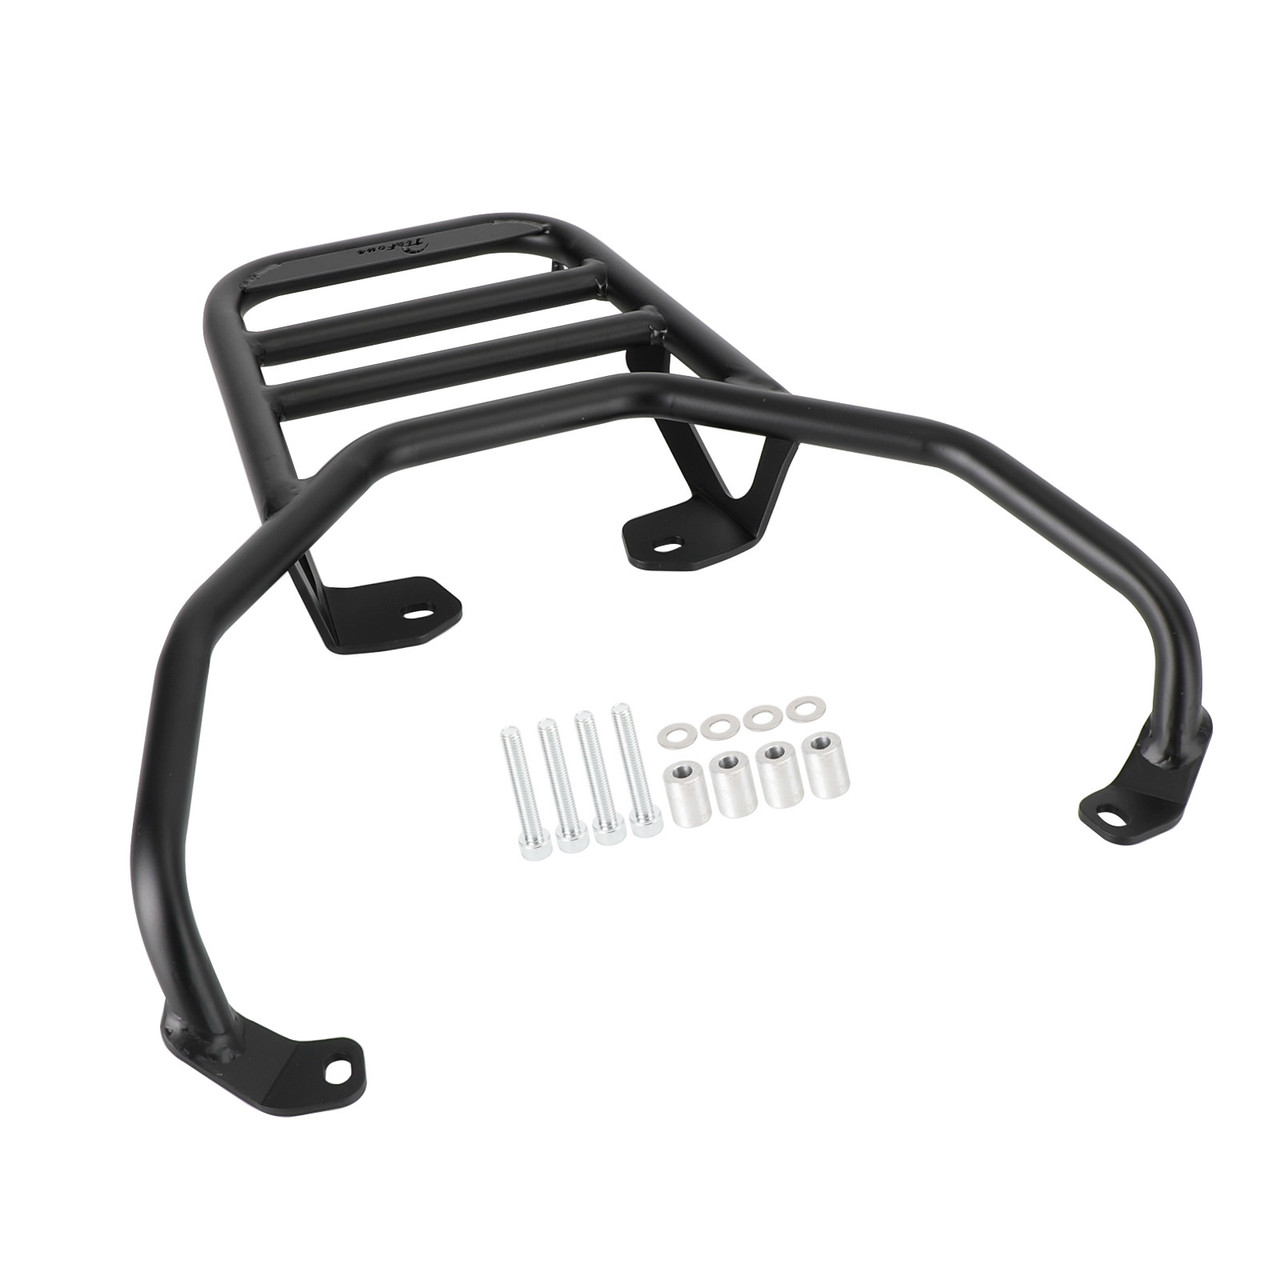 Rear Rack Luggage Carrier Fits Piaggio MP3 300 HPE Yourban Sport Business 15-22